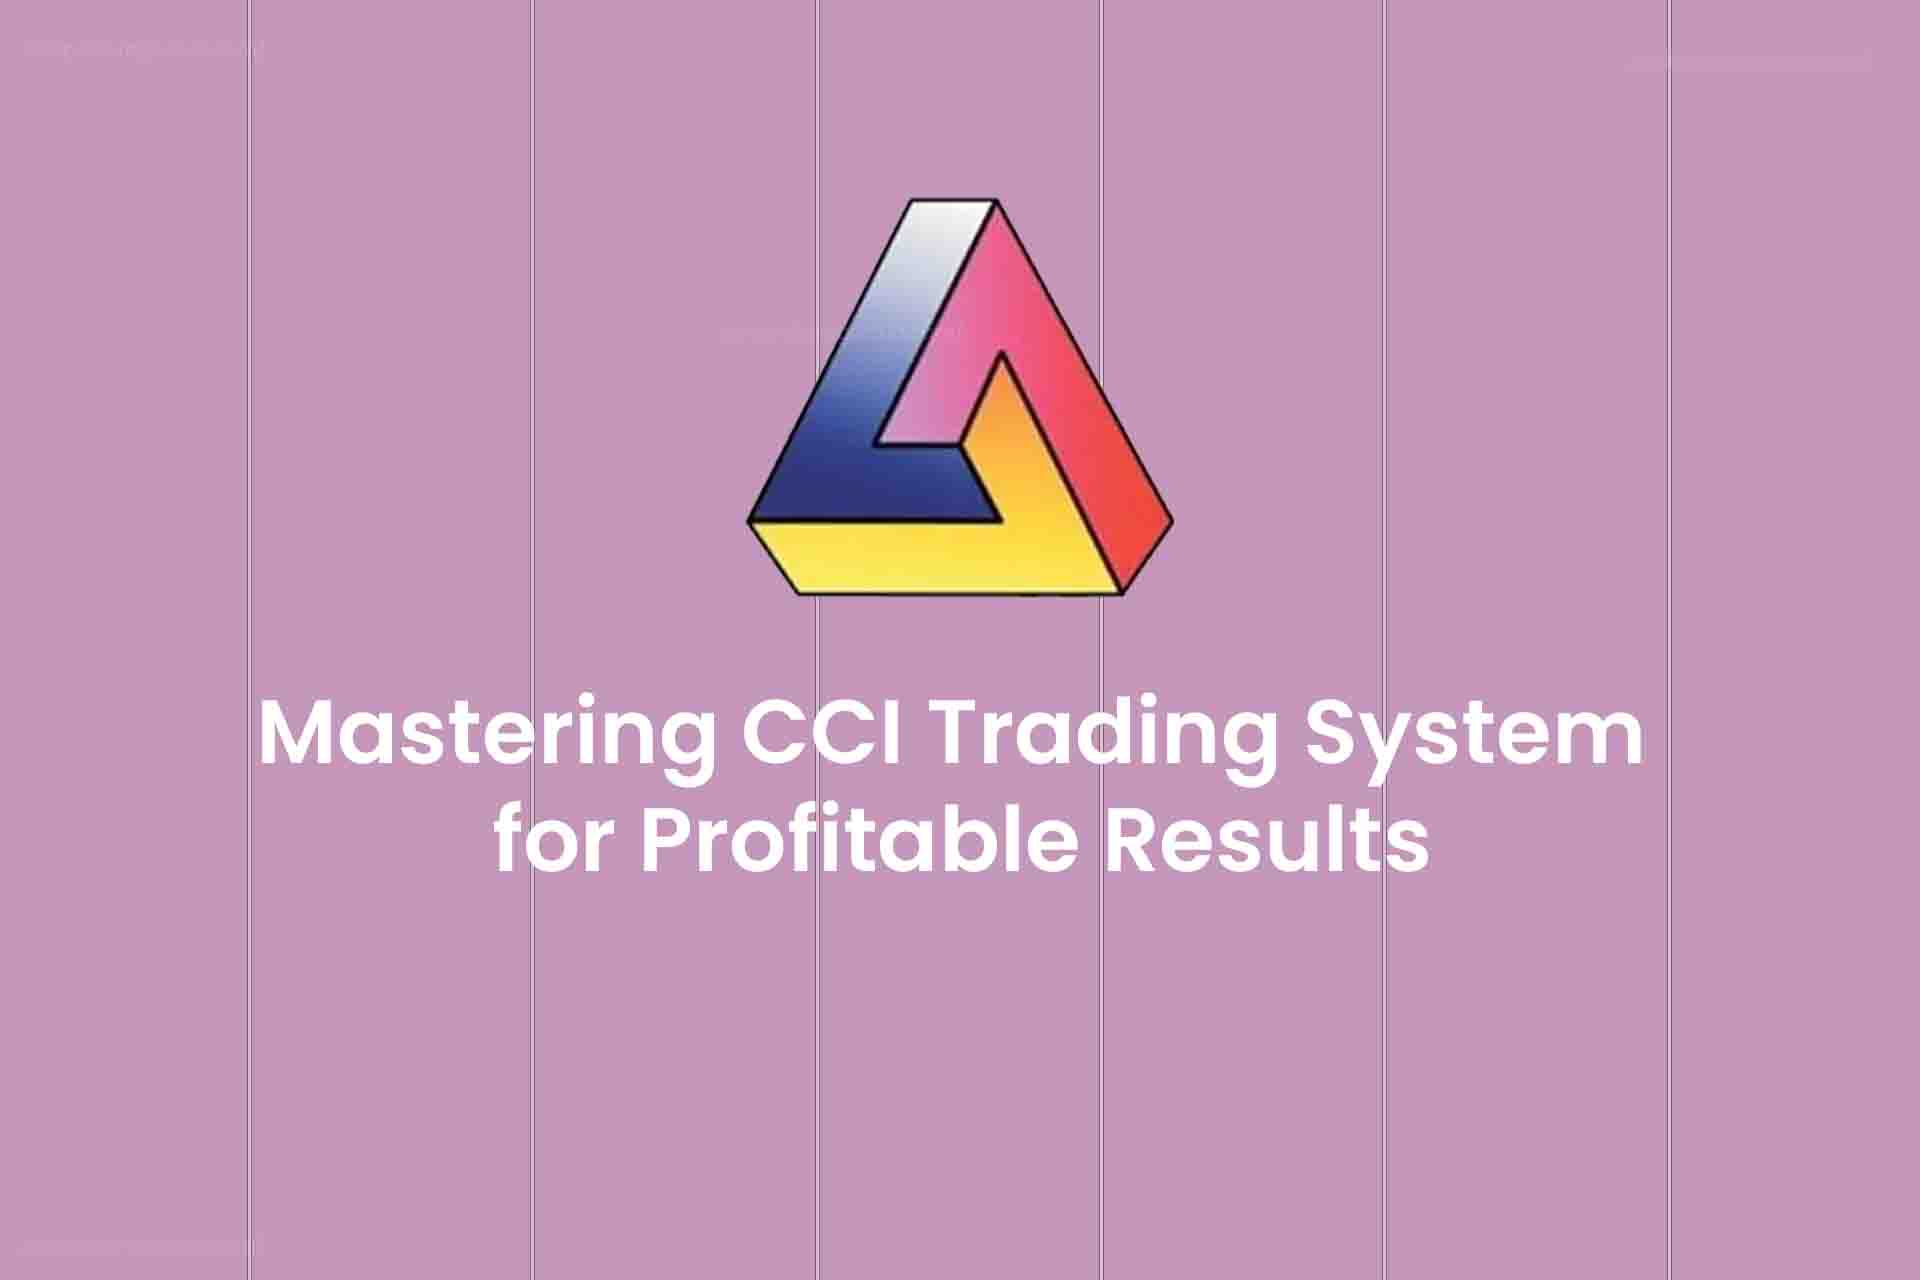 Mastering CCI Trading System for Profitable Results